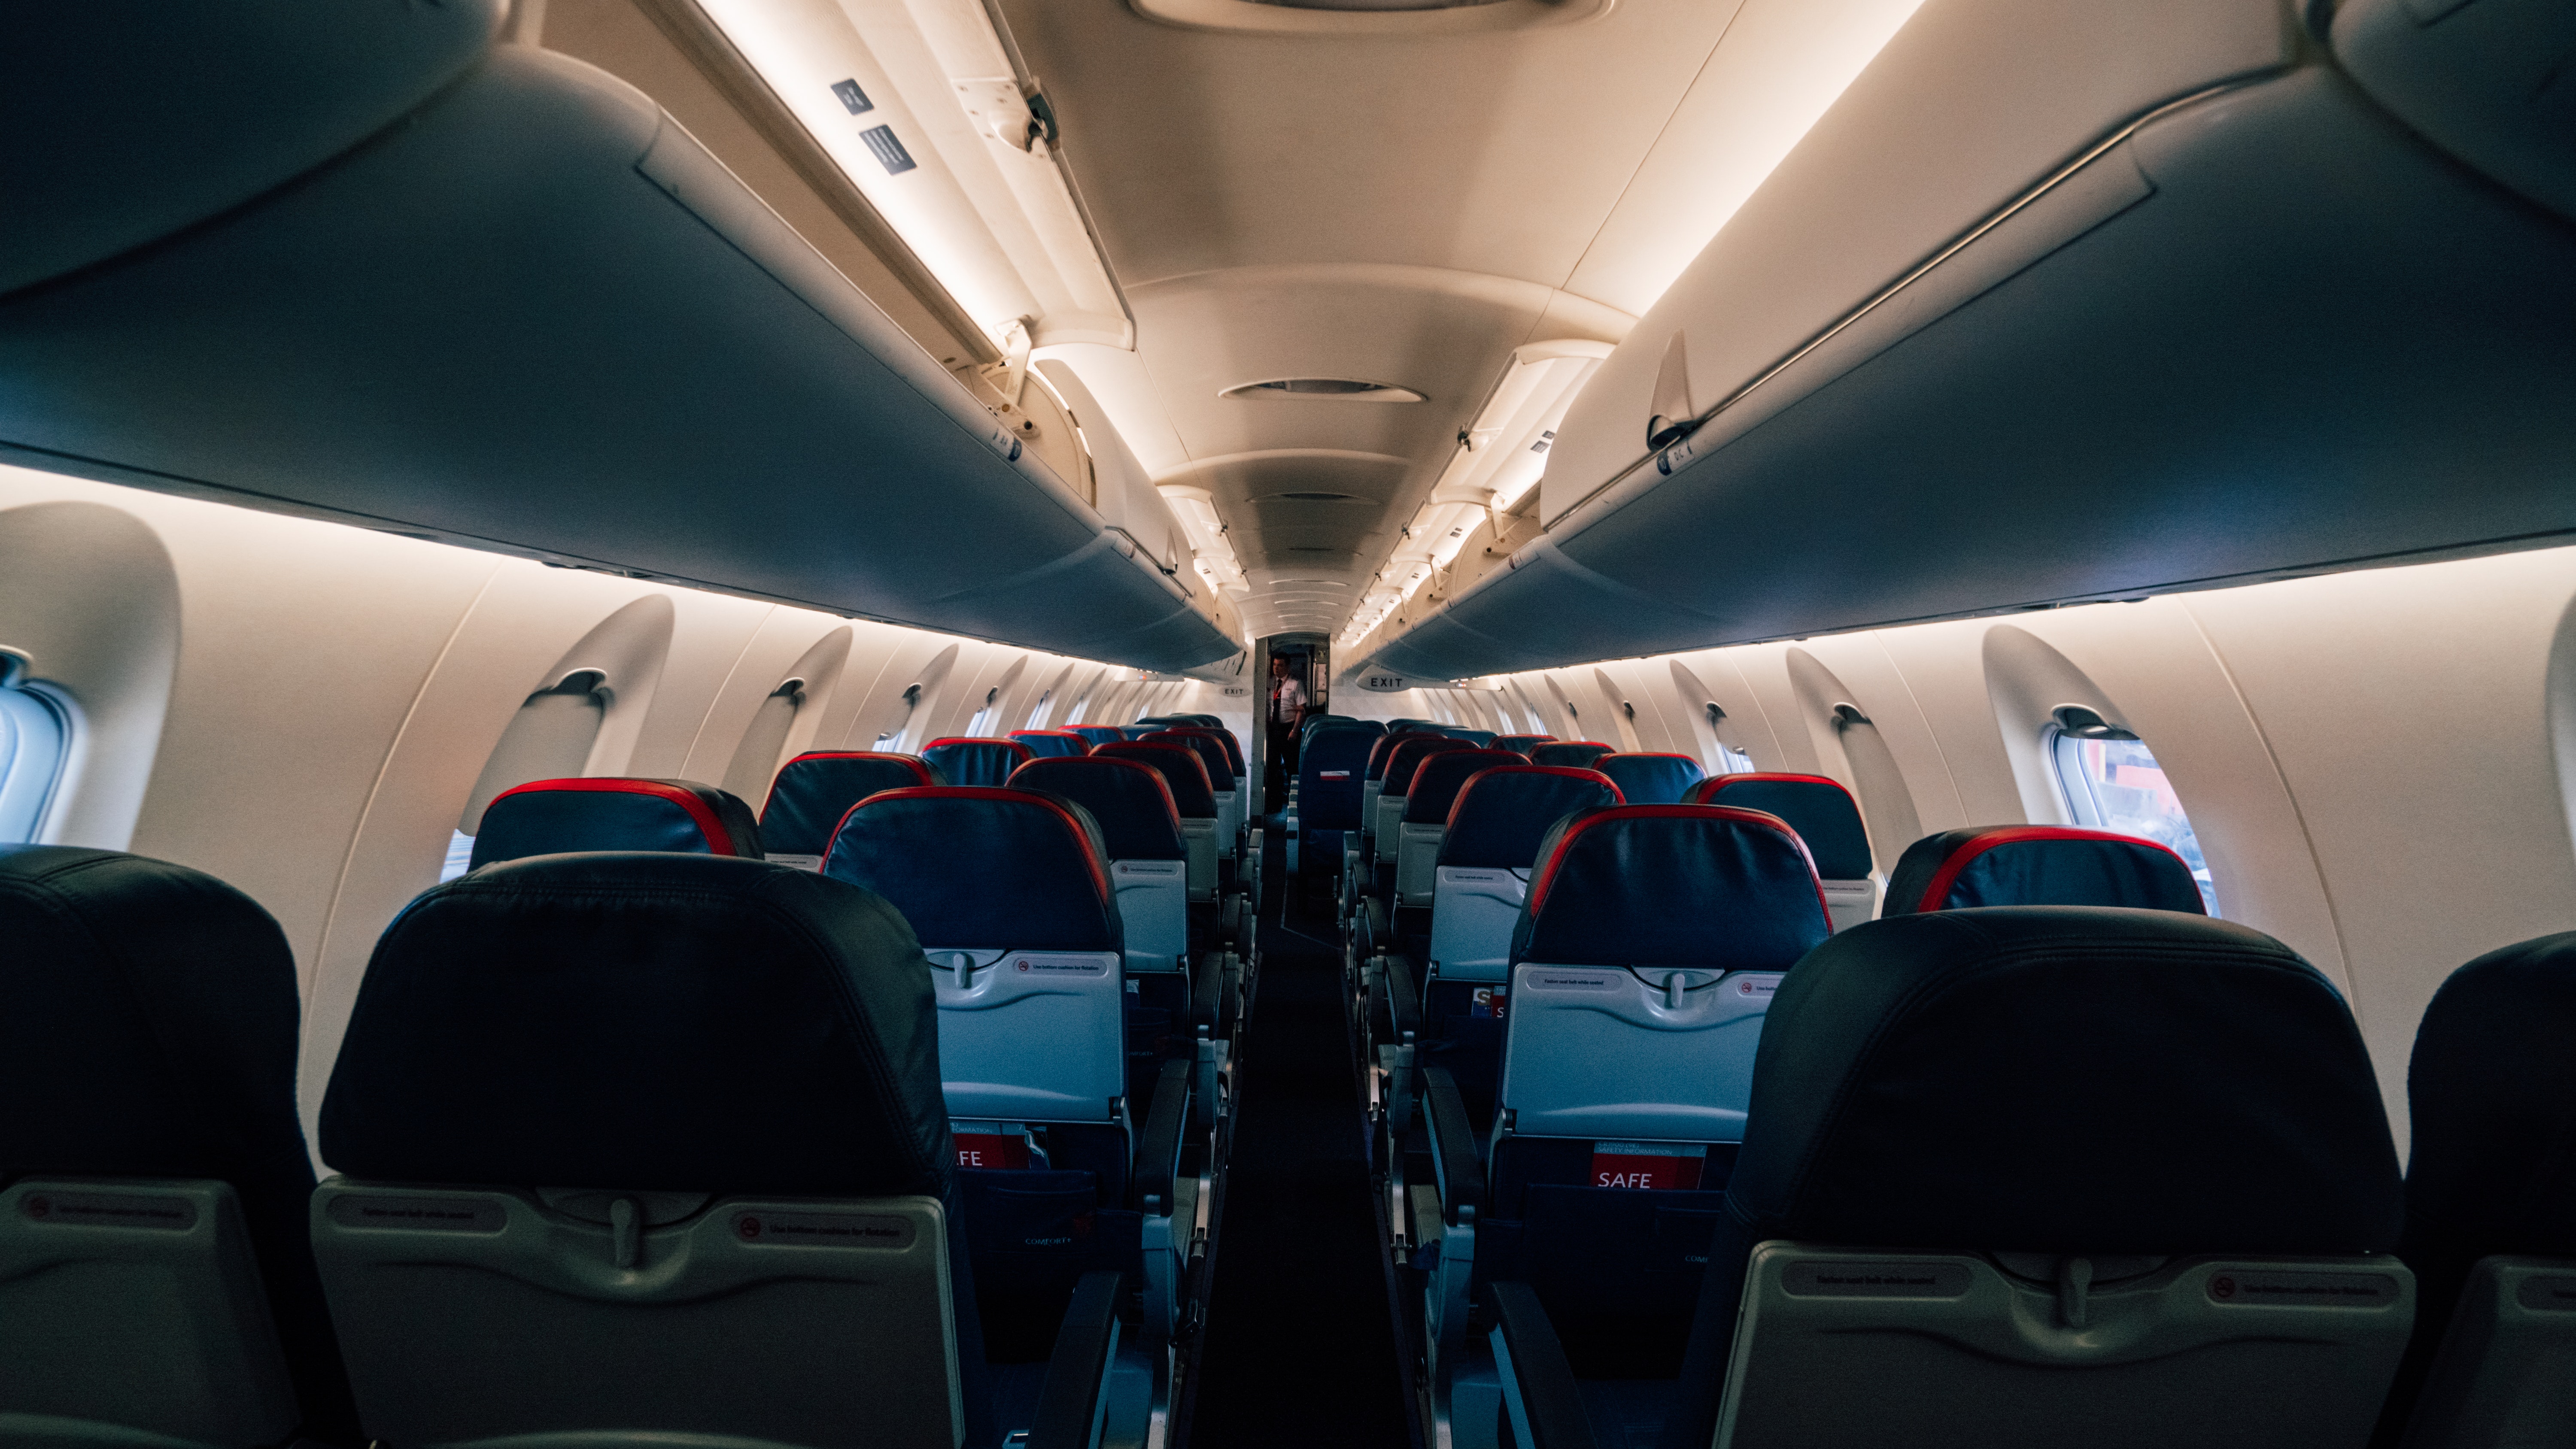 Inside of empty aircraft before departure